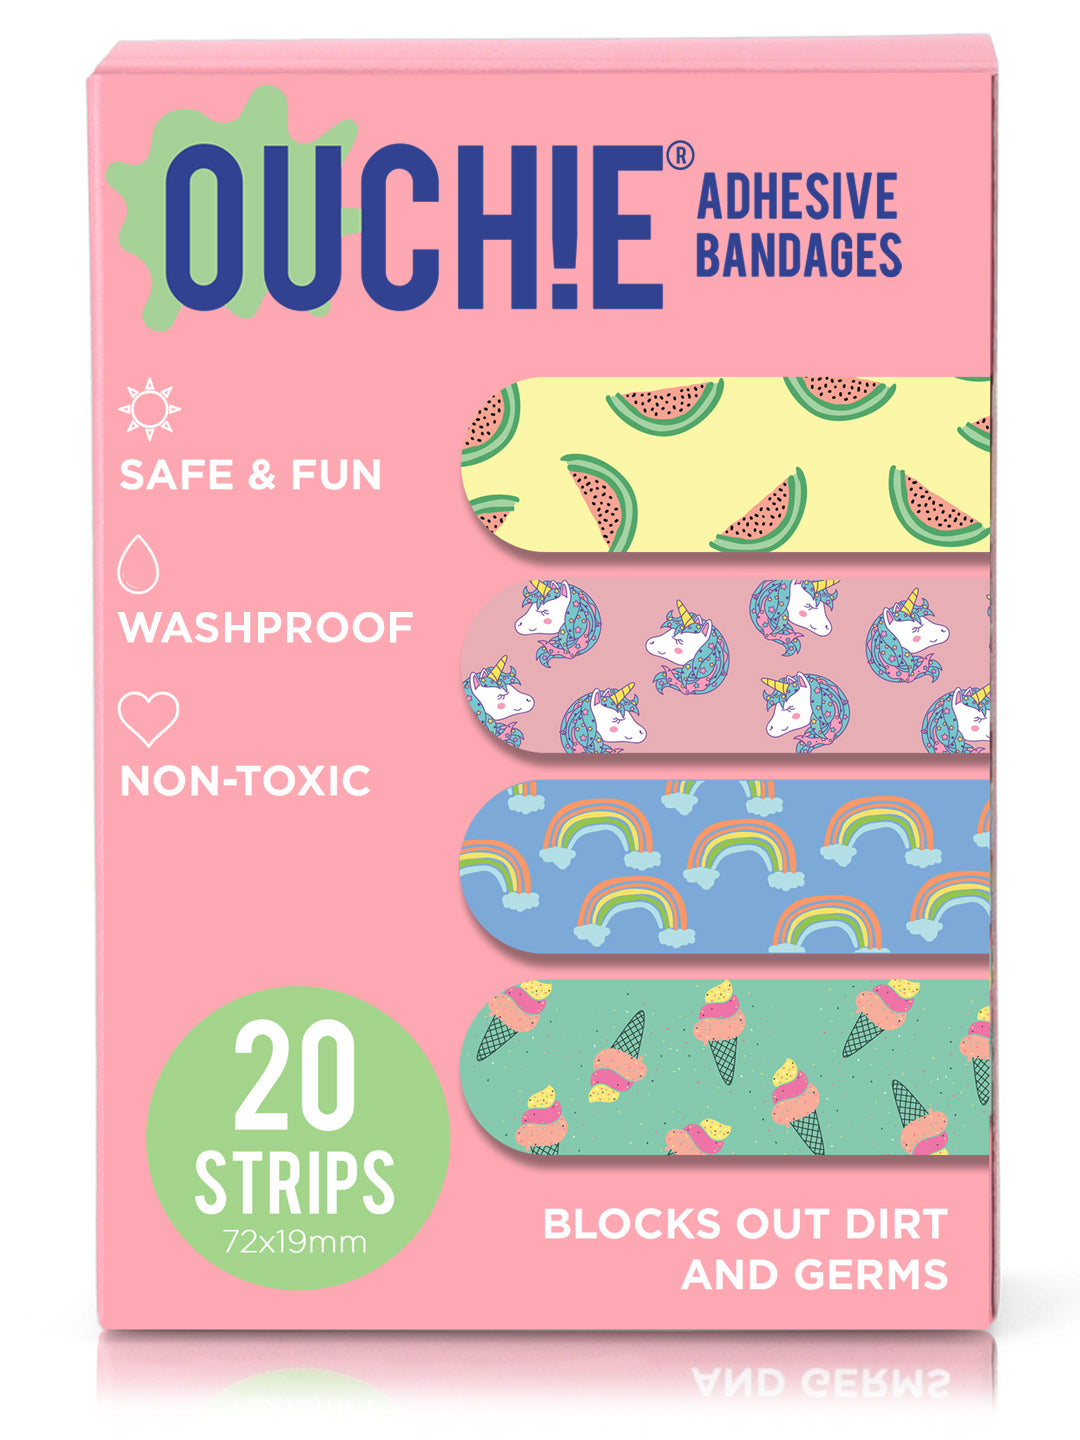 Ouchie Non-Toxic Printed Bandages Double Combo Set (40 Pack) - Pink & Lime Green